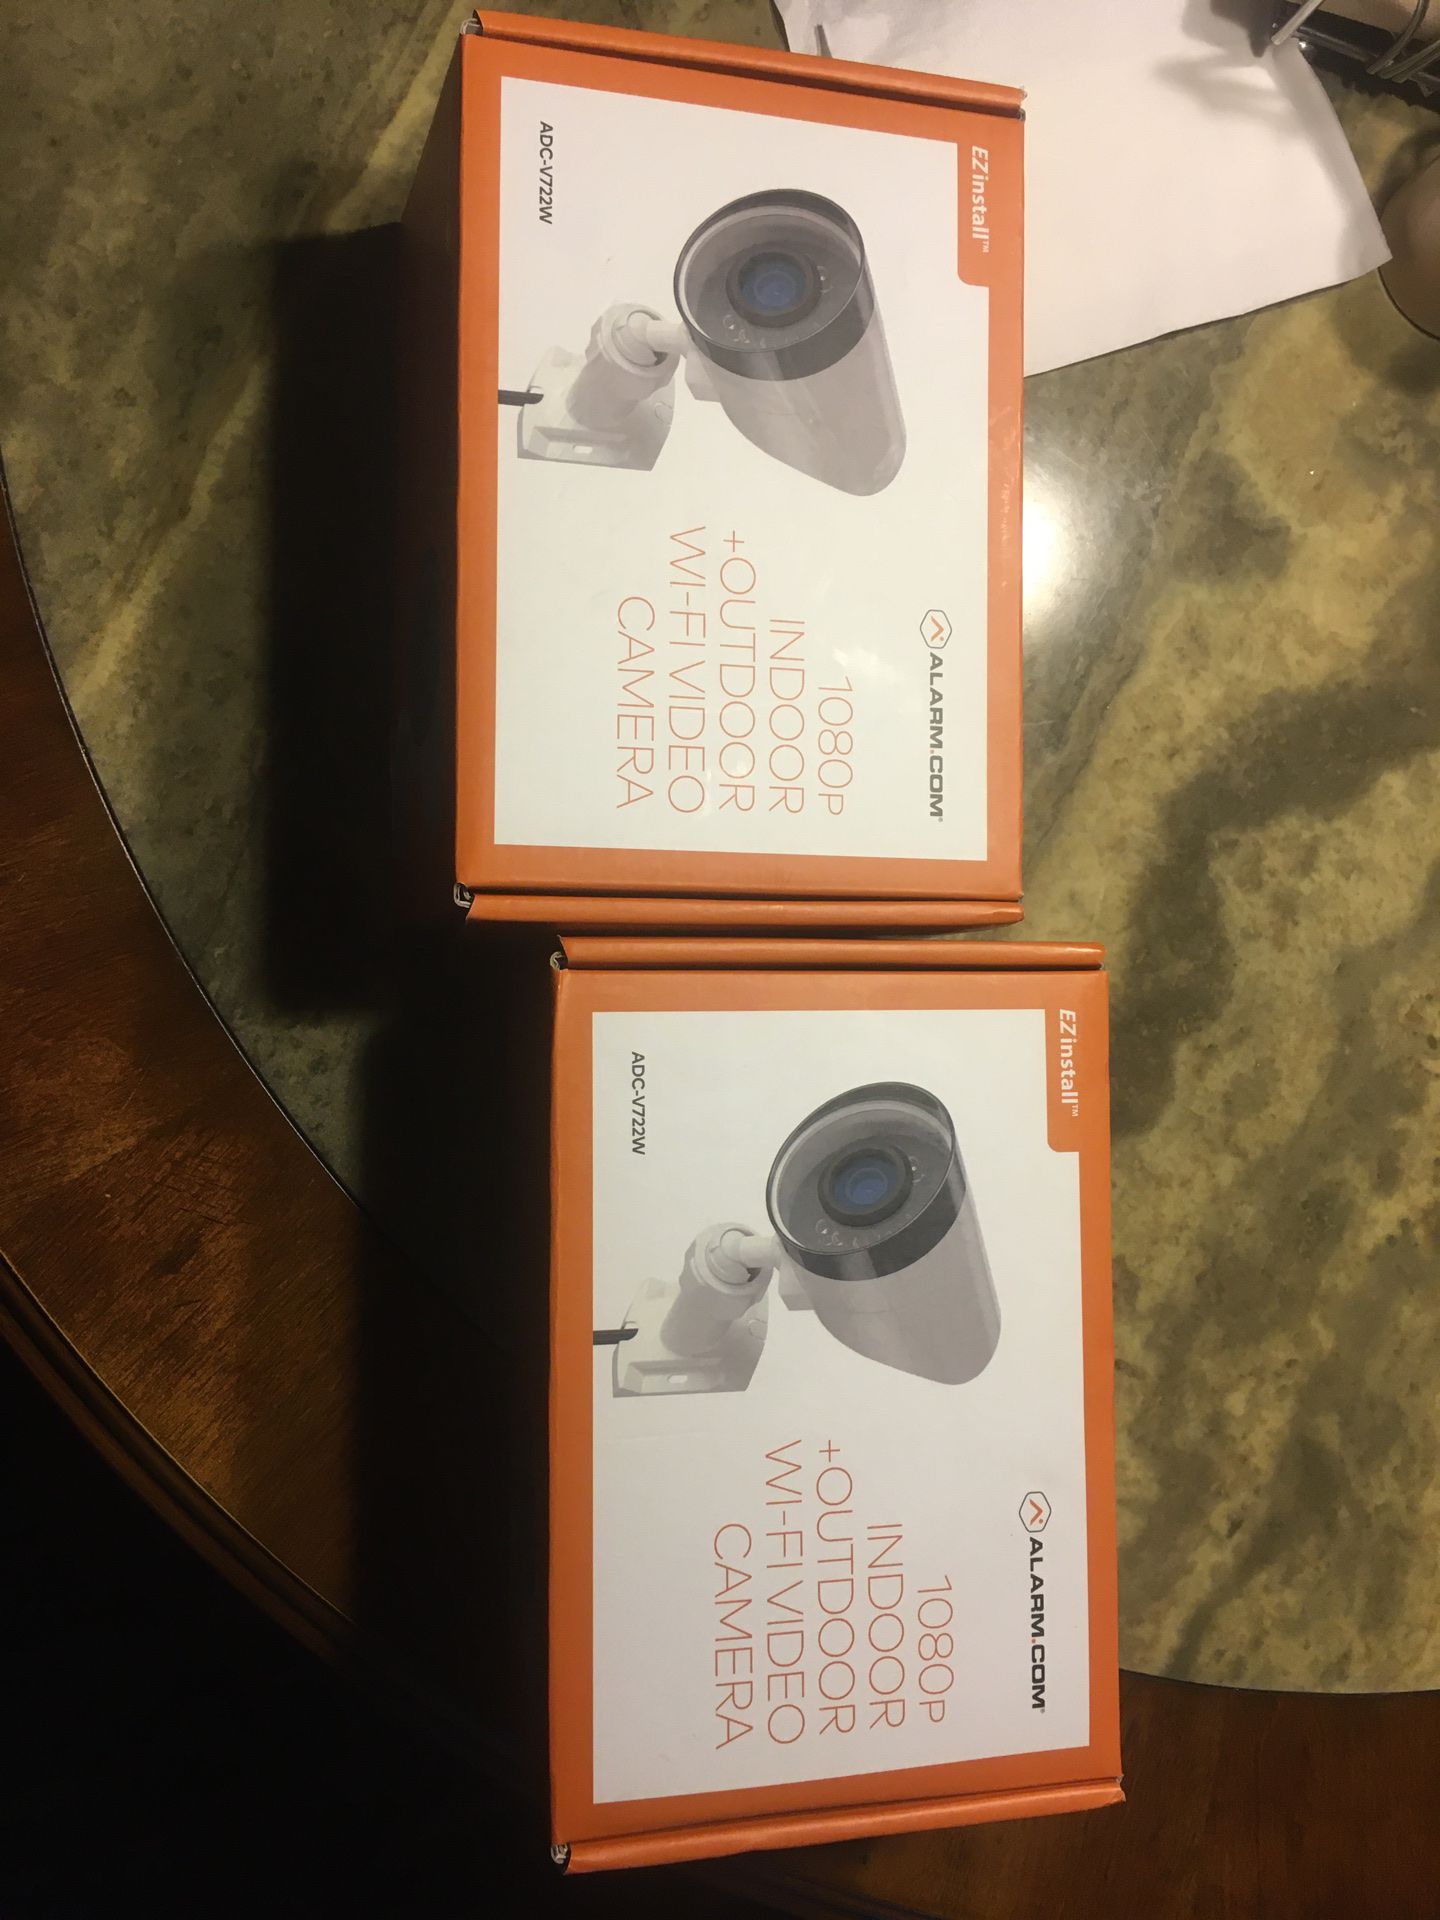 WiFi video camera for home or business